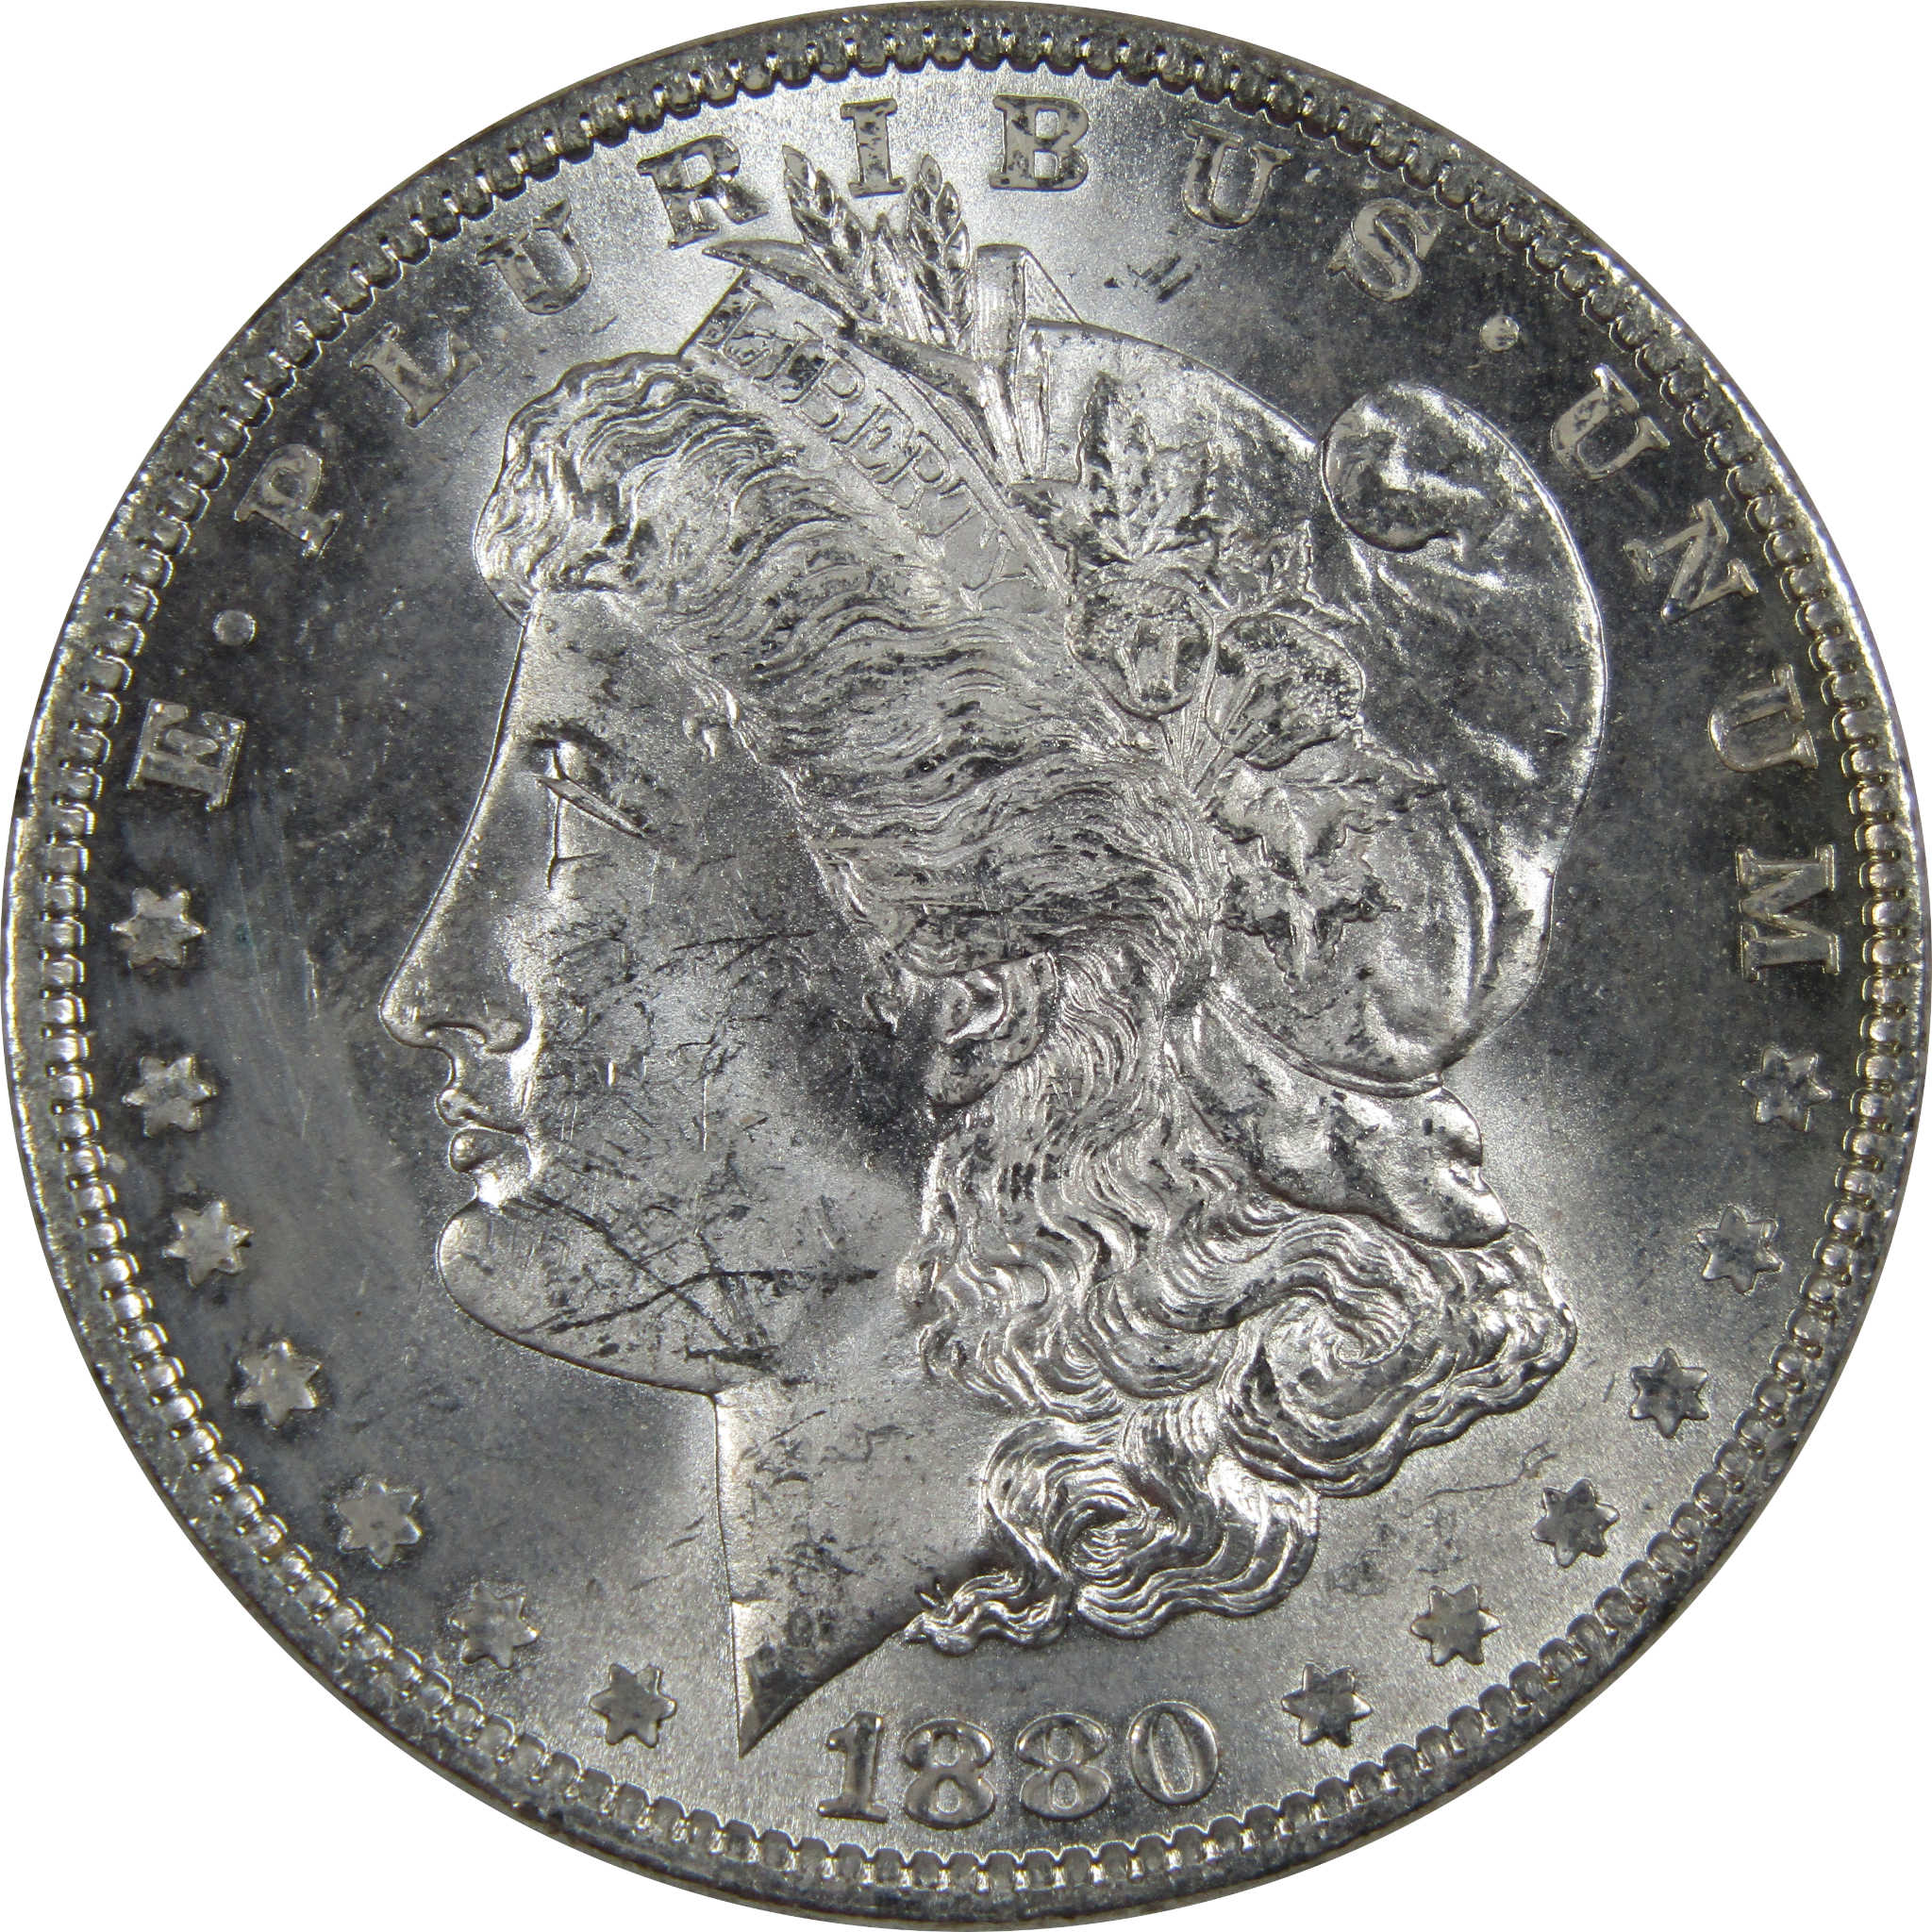 1880 Morgan Dollar BU Uncirculated Mint State 90% Silver SKU:I192 - Morgan coin - Morgan silver dollar - Morgan silver dollar for sale - Profile Coins &amp; Collectibles